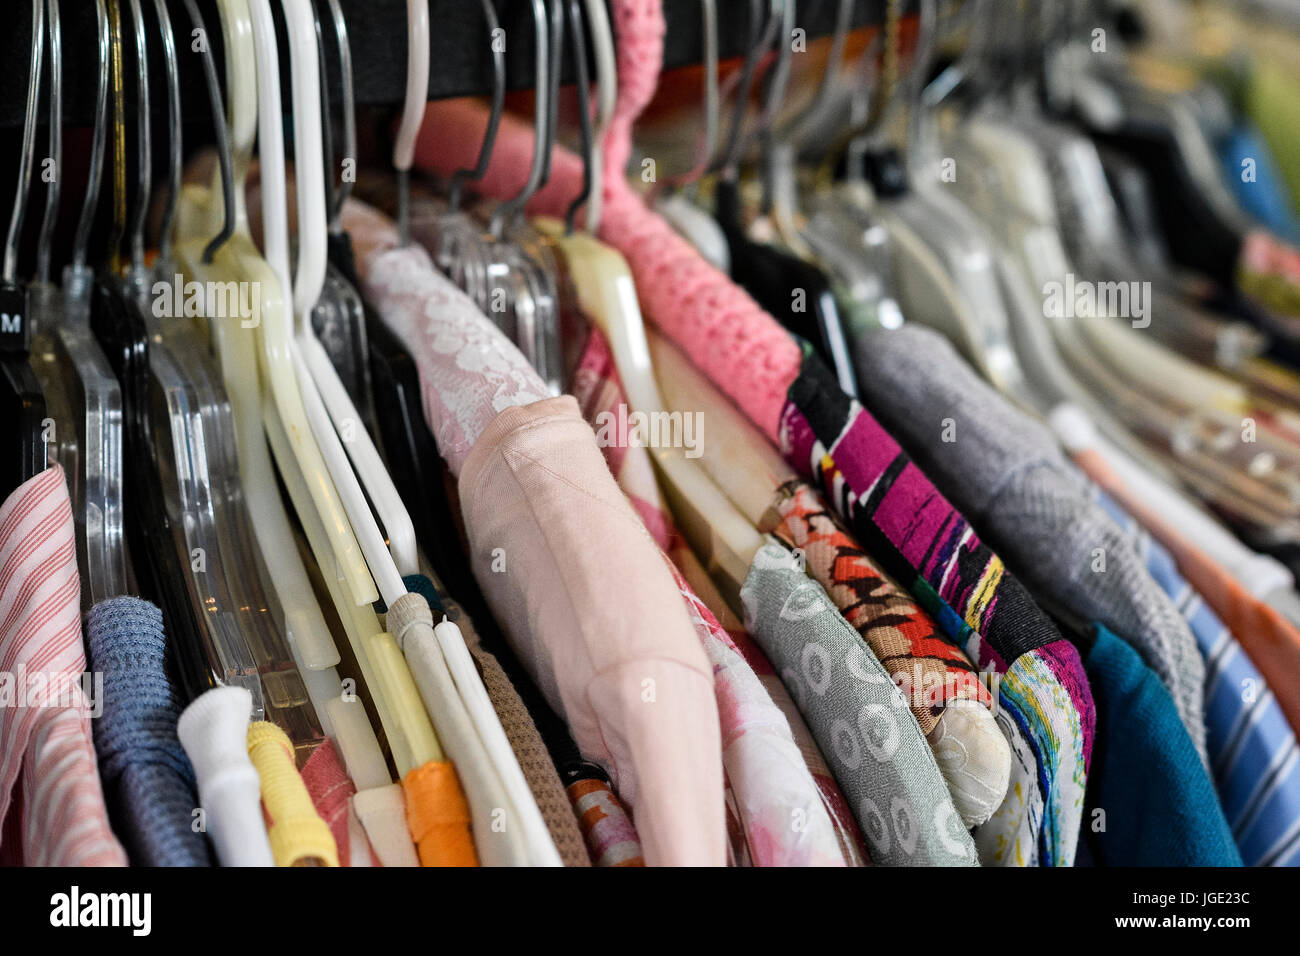 Rack of woman's dresses displayed at a thrift shop. Stock Photo